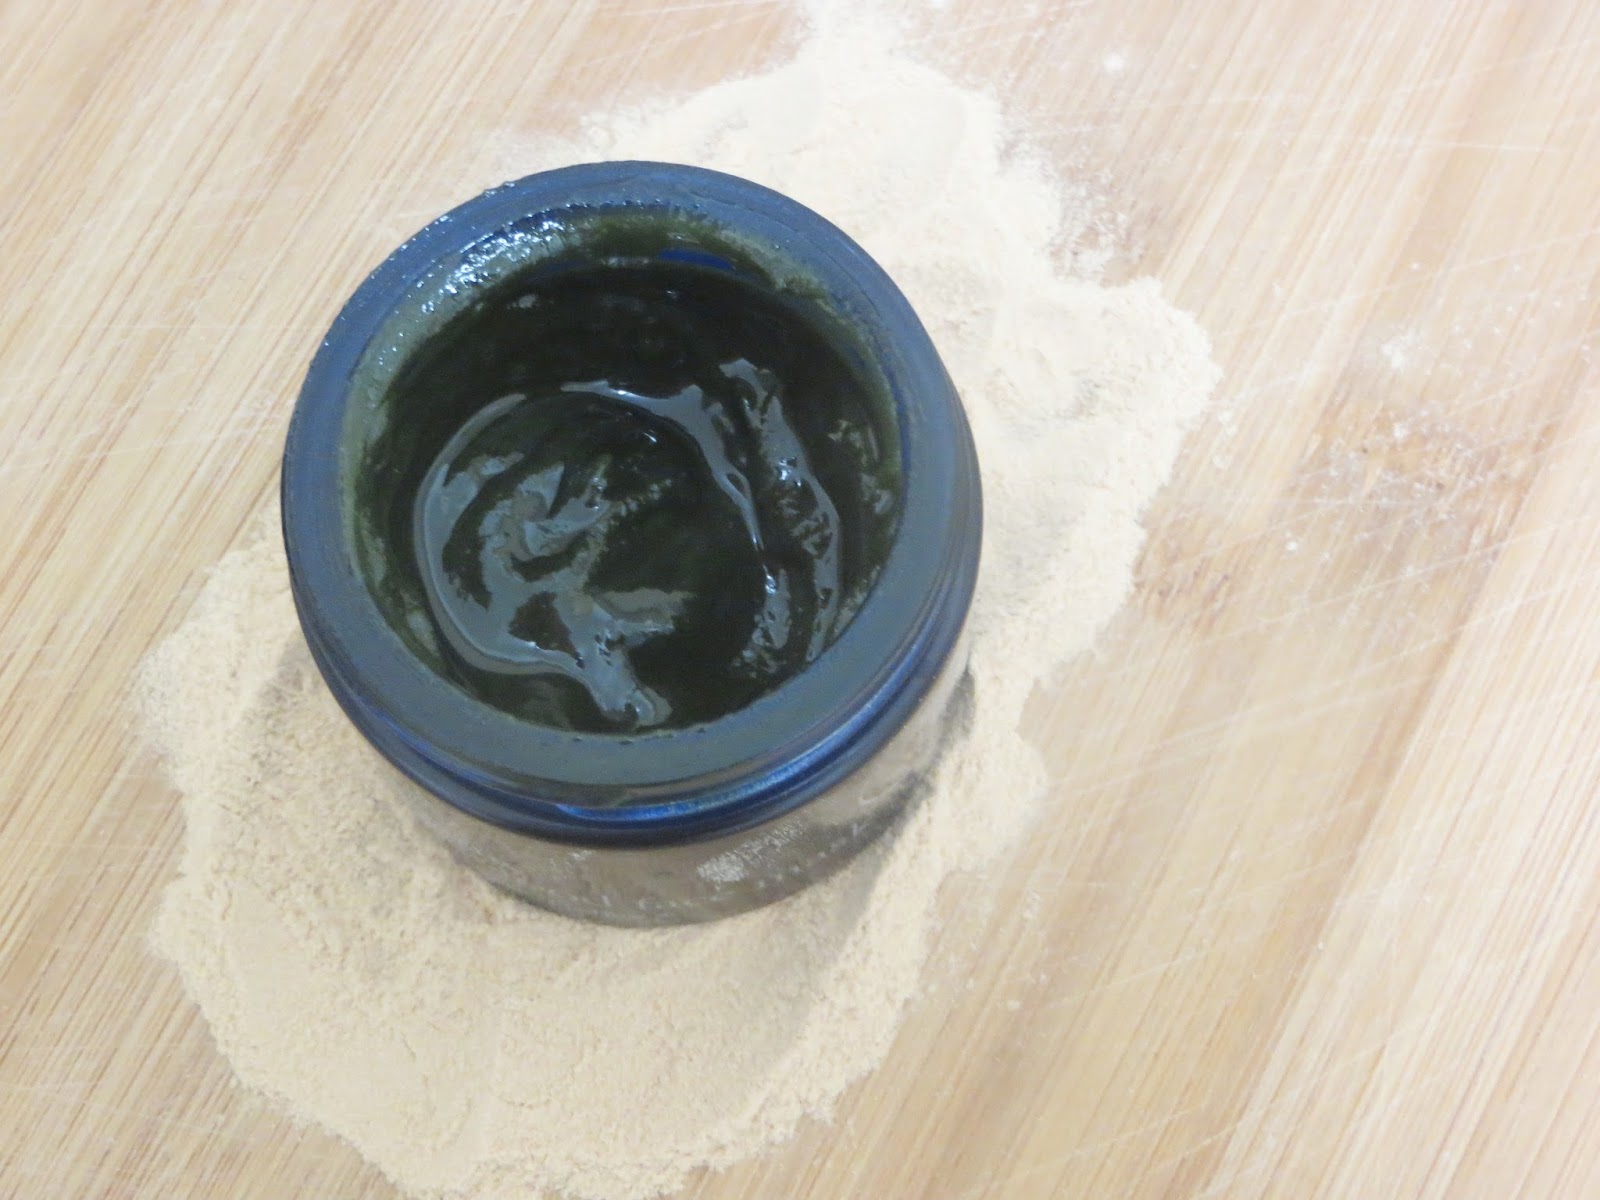 Inlight Organic Superfood Face Mask Review